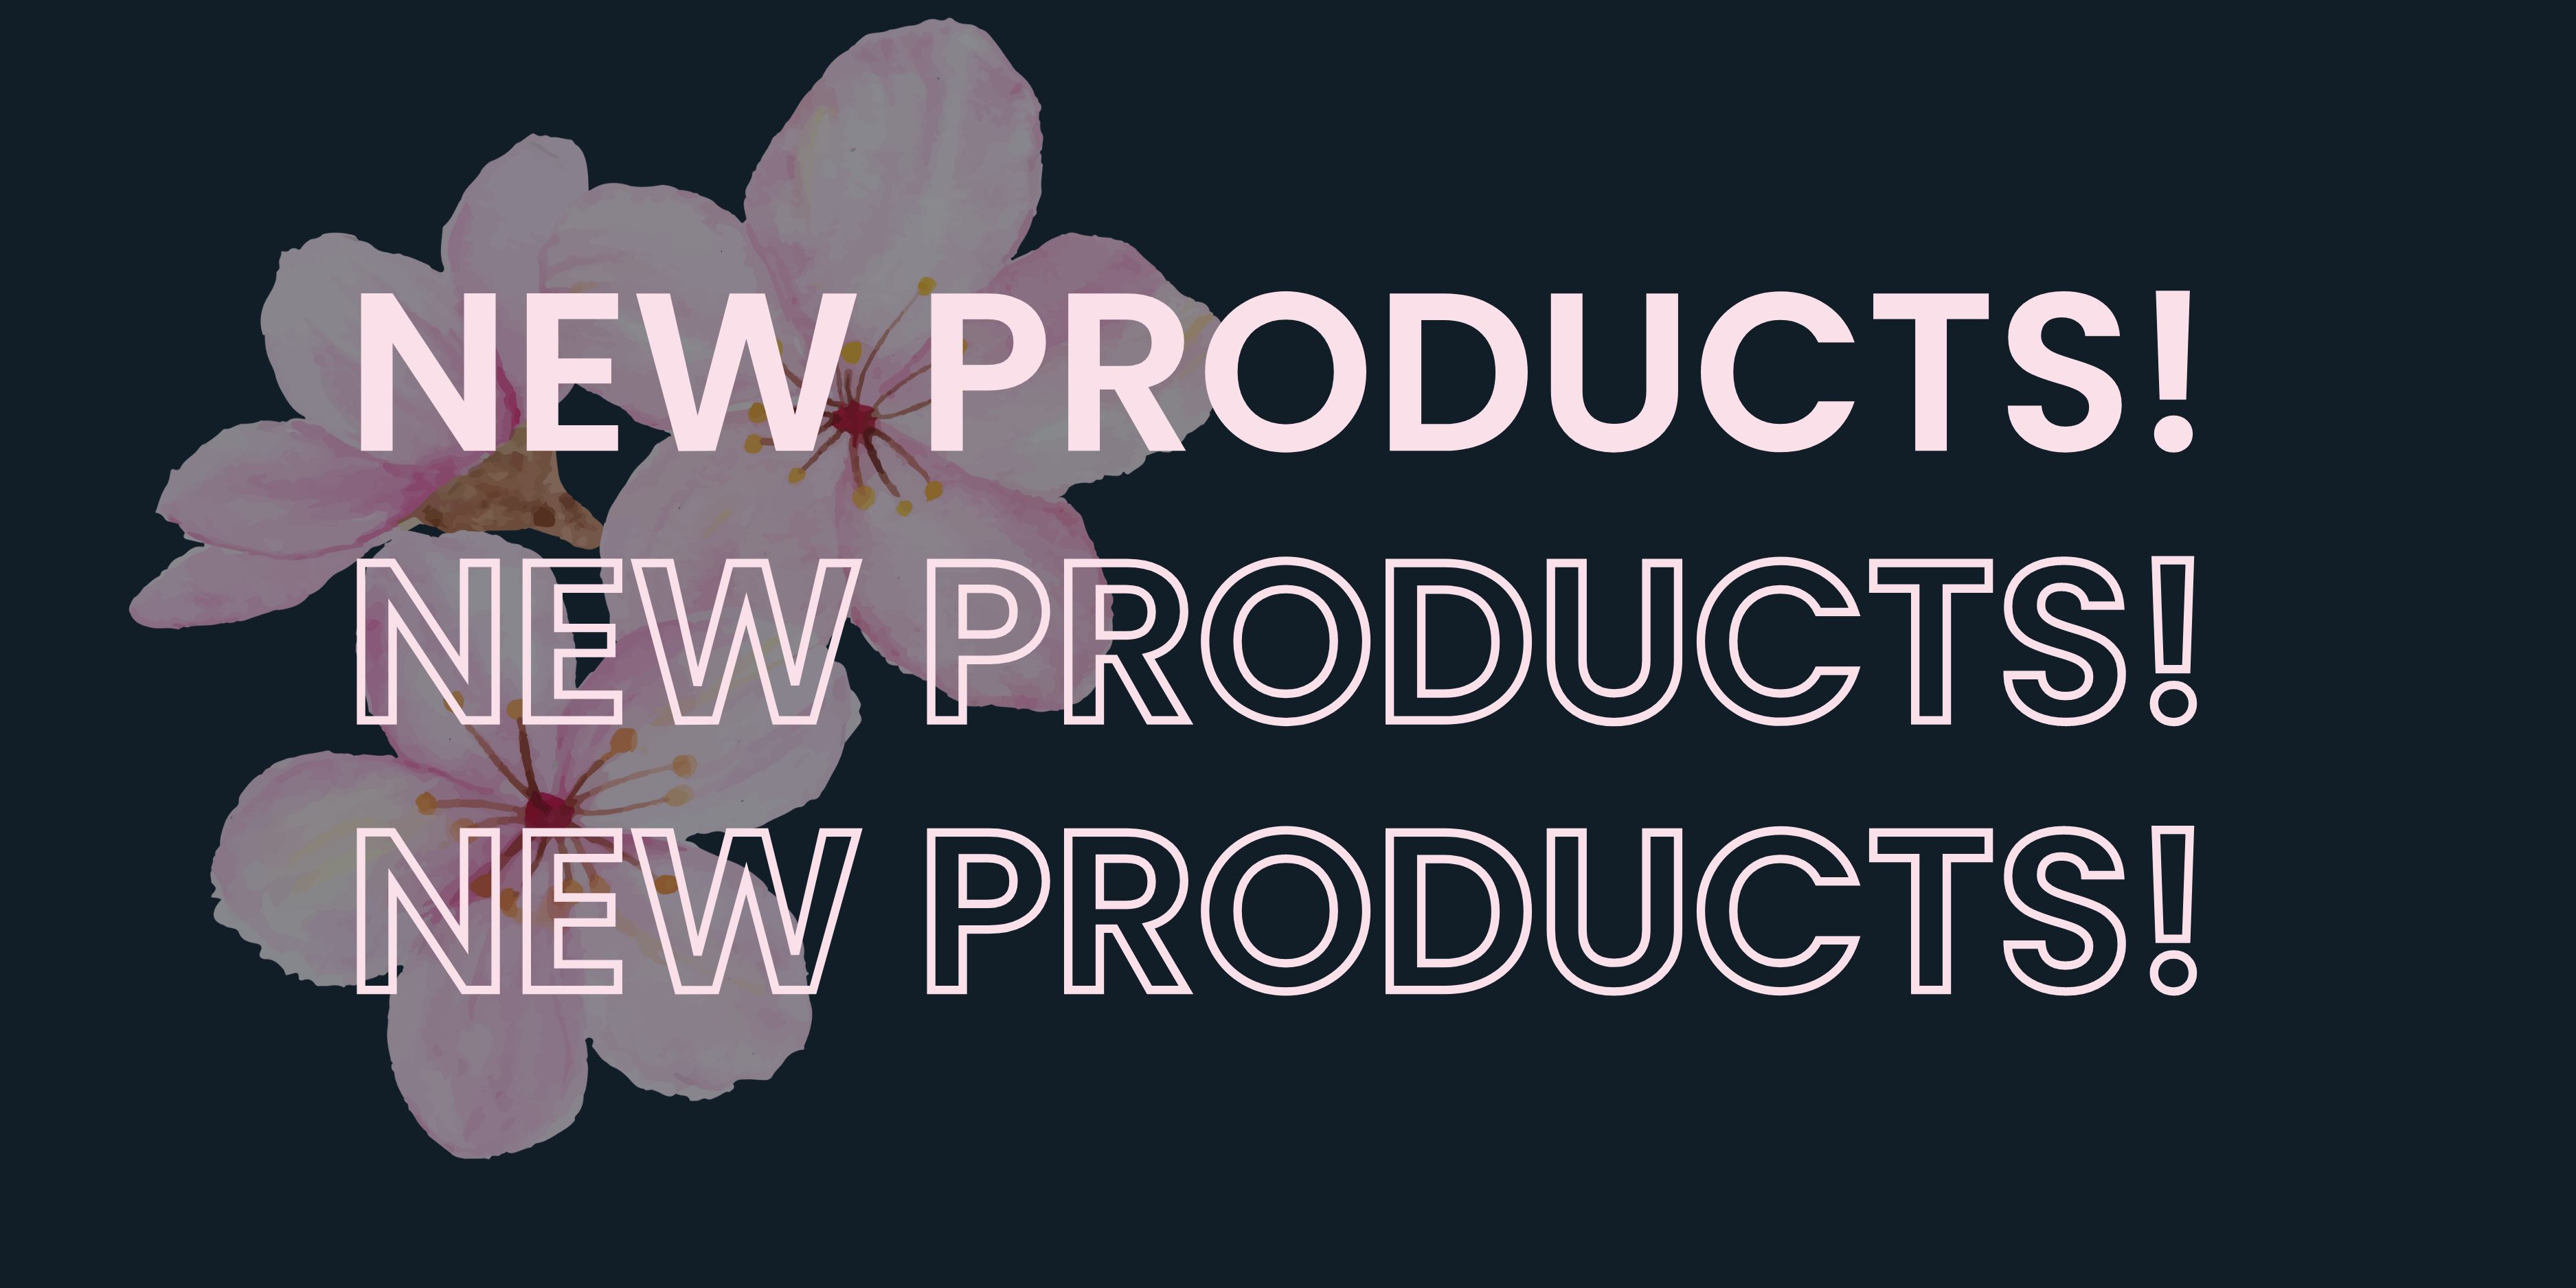 New_product_Carousel_3.png